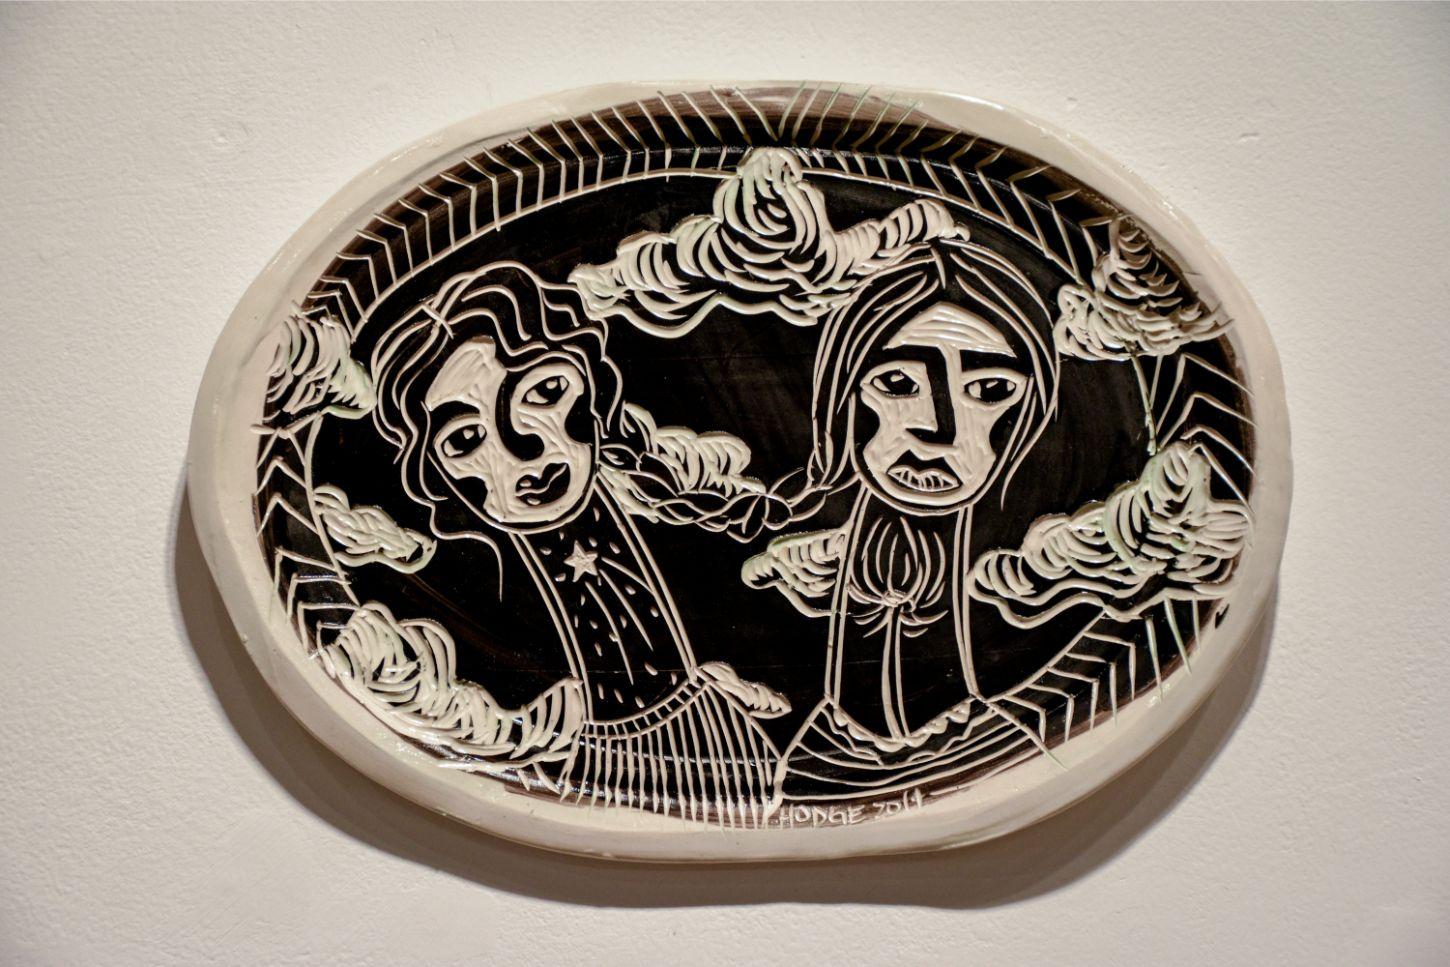 Wishing Wanders 
Carved porcelain
9.5 inches x 13.5 inches x 0.75 inch
Unique

Her poetic porcelain plates examine and reimagine the history of art in a way that values women, not only in body, but in wholeness, power, and love. Focusing on the